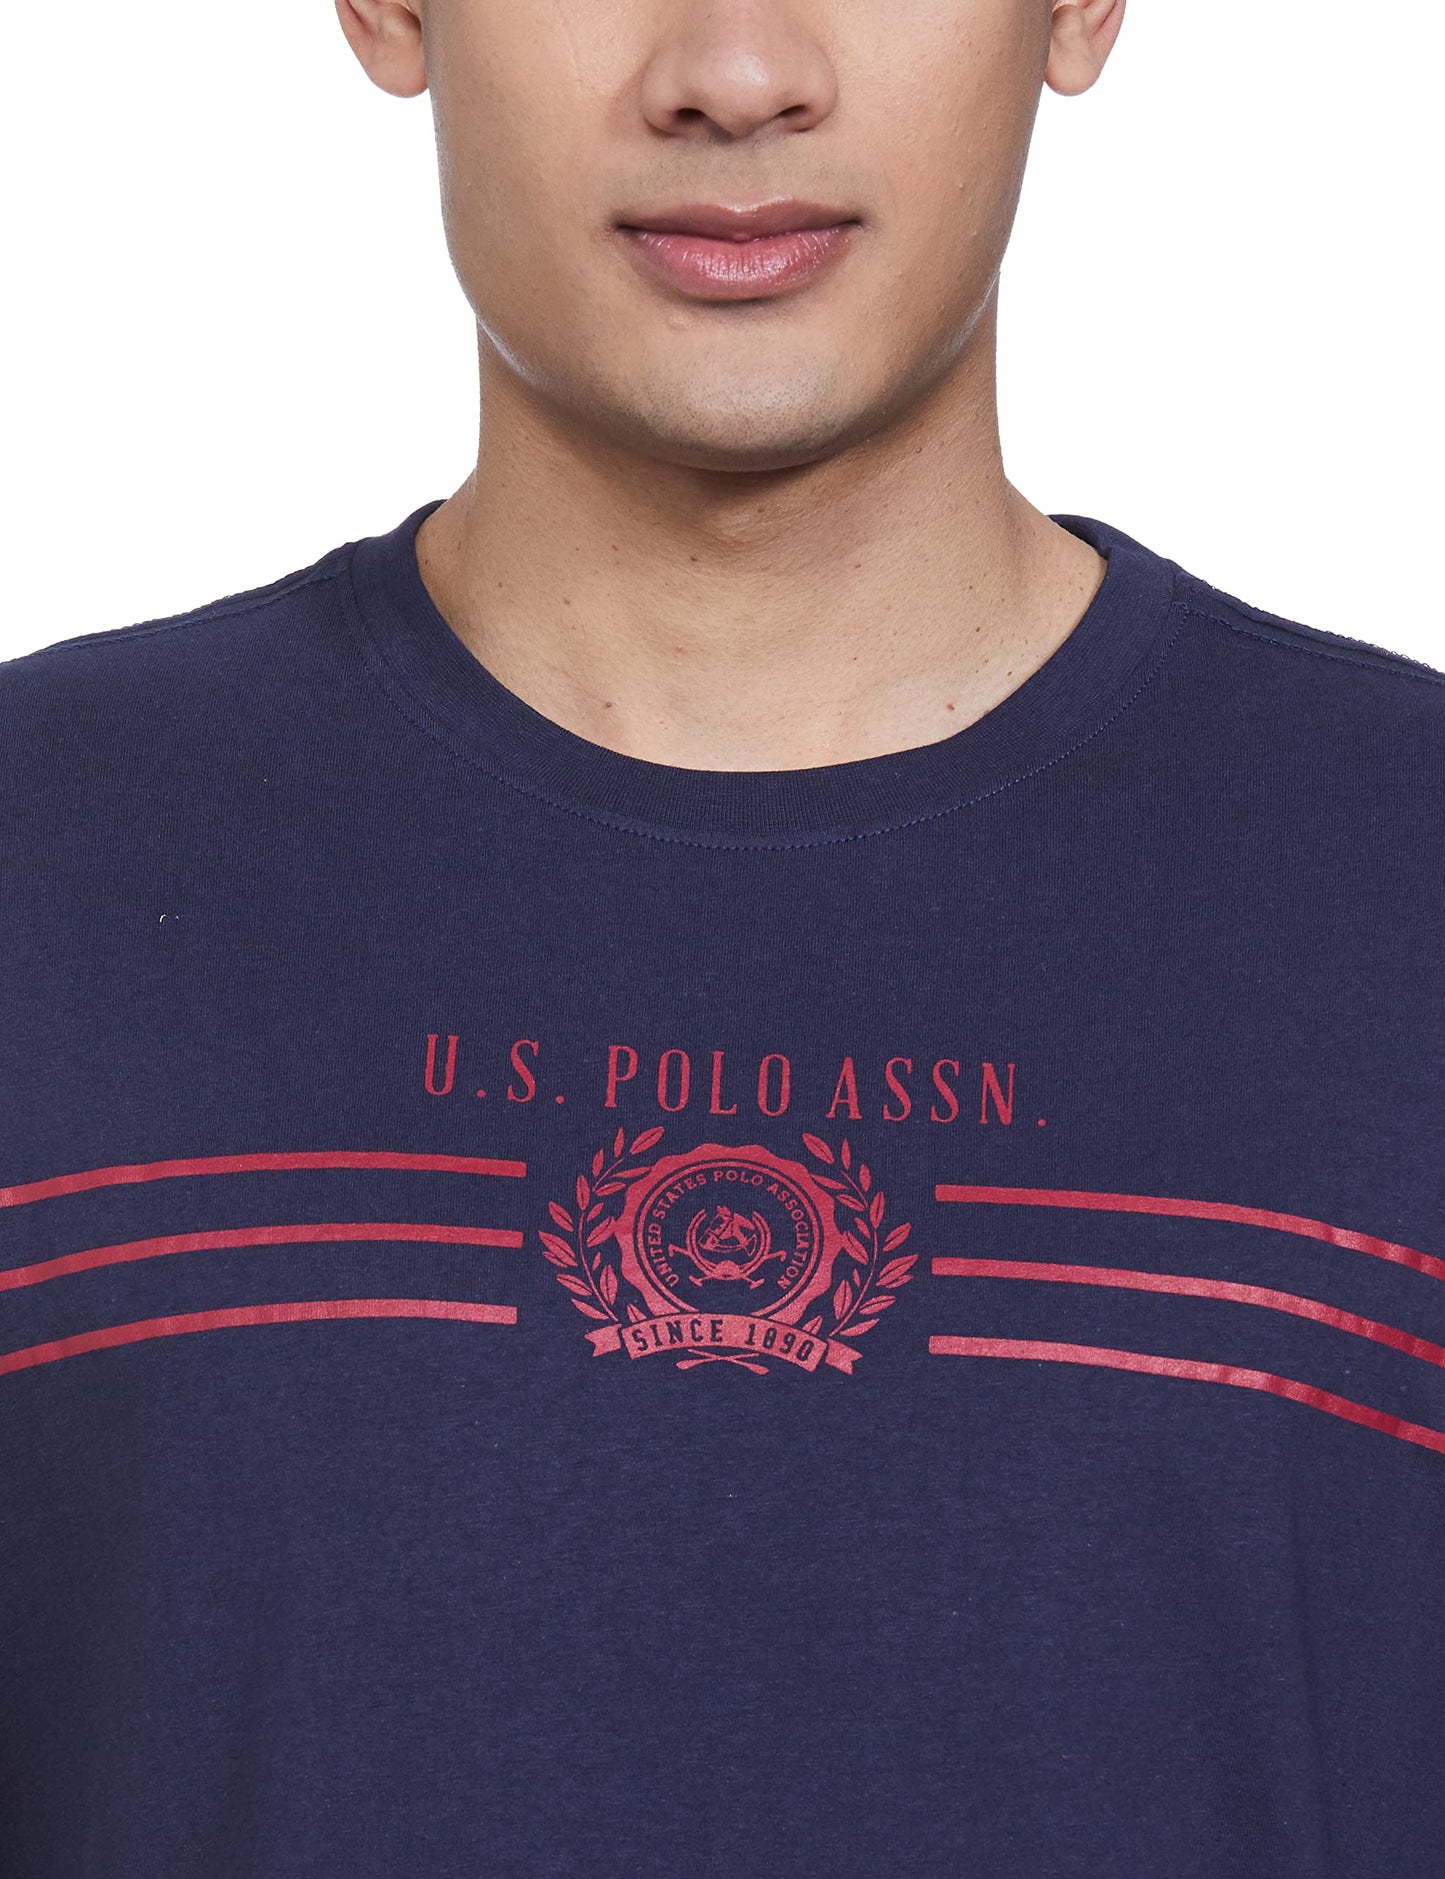 US Polo ASSN. Full Sleeve Round Neck T Shirts, L (USTSHS1383_Red_L)